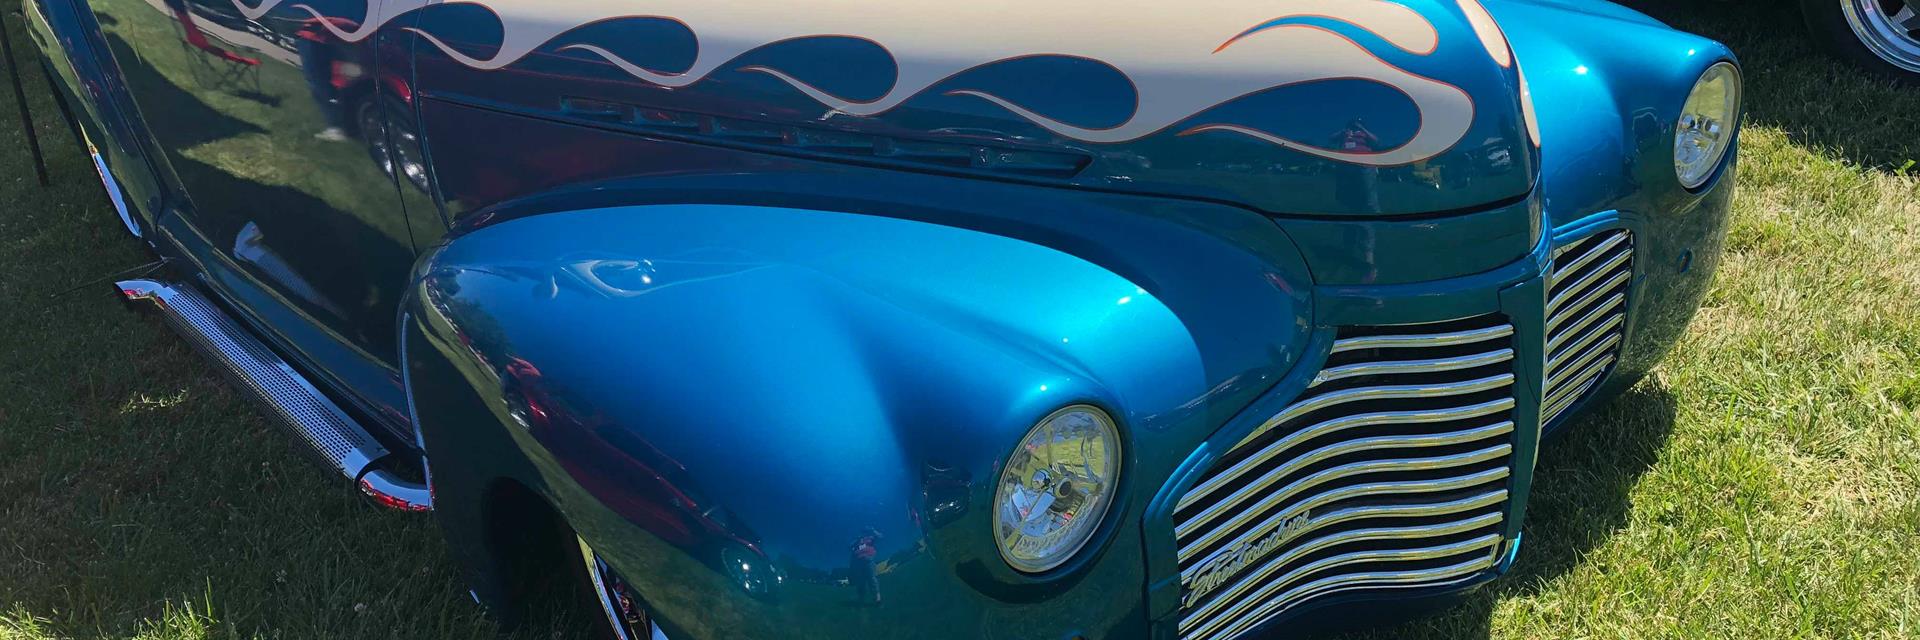 a blue and silver classic car on display at a classic car show in chatham-kent